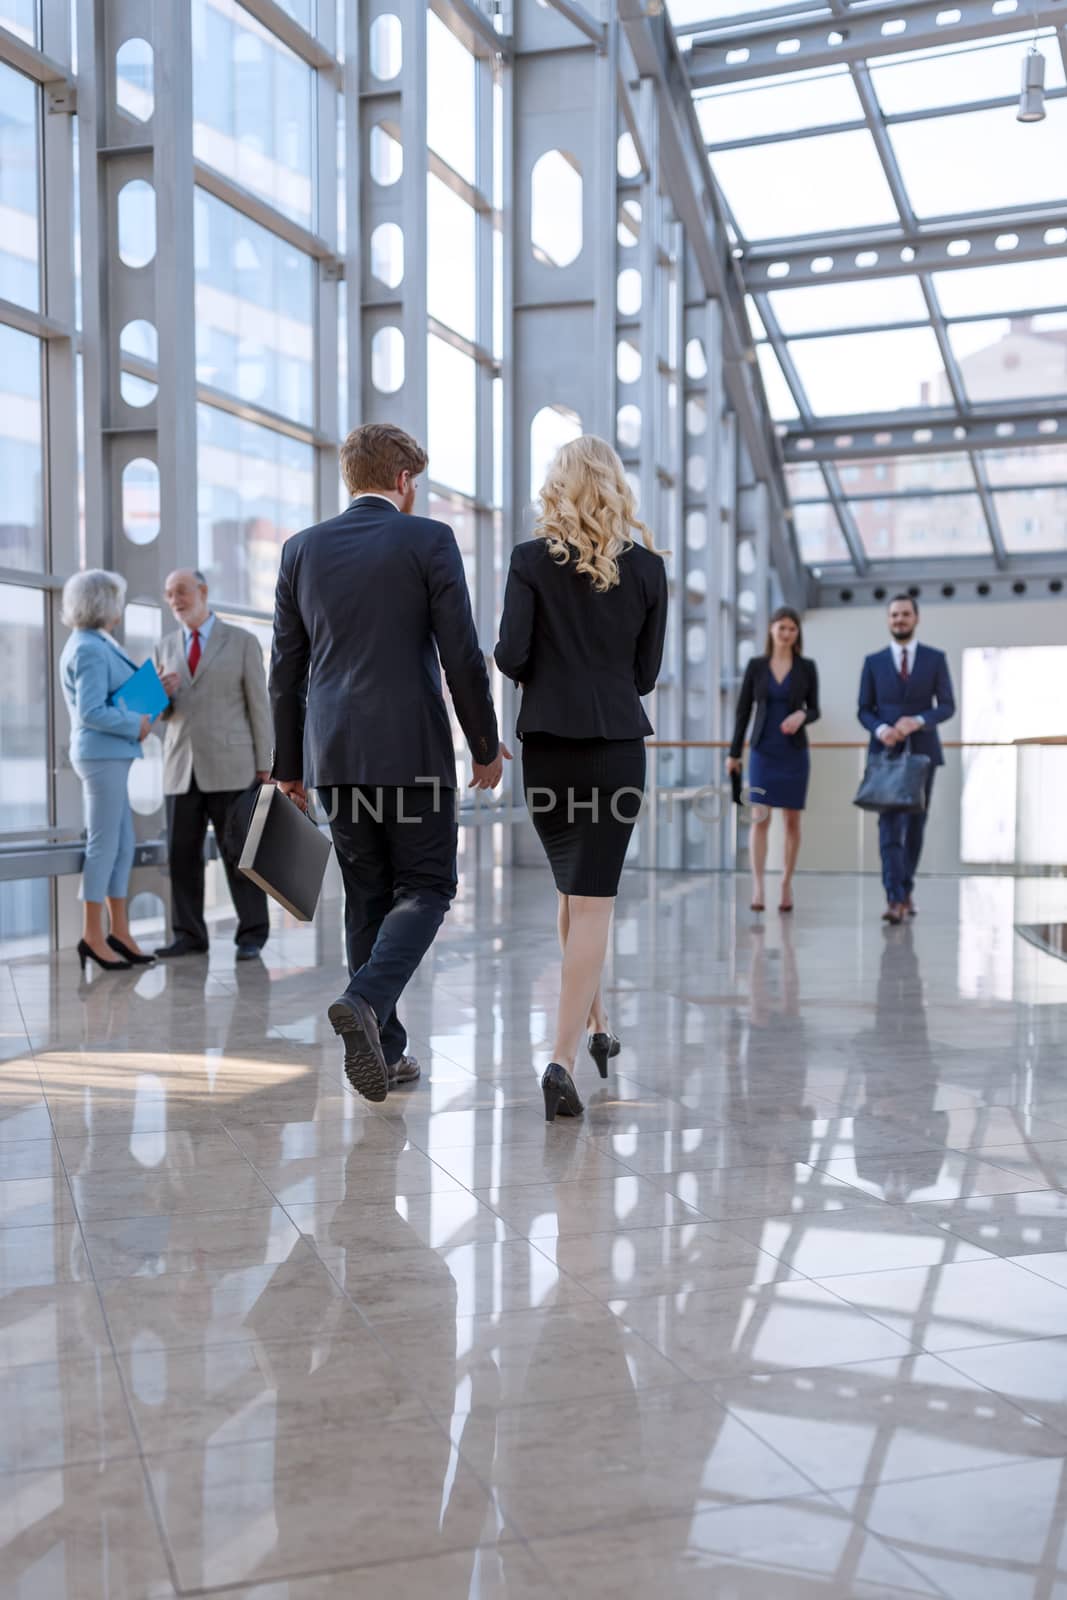 Business people walking in the lobby of a modern business center